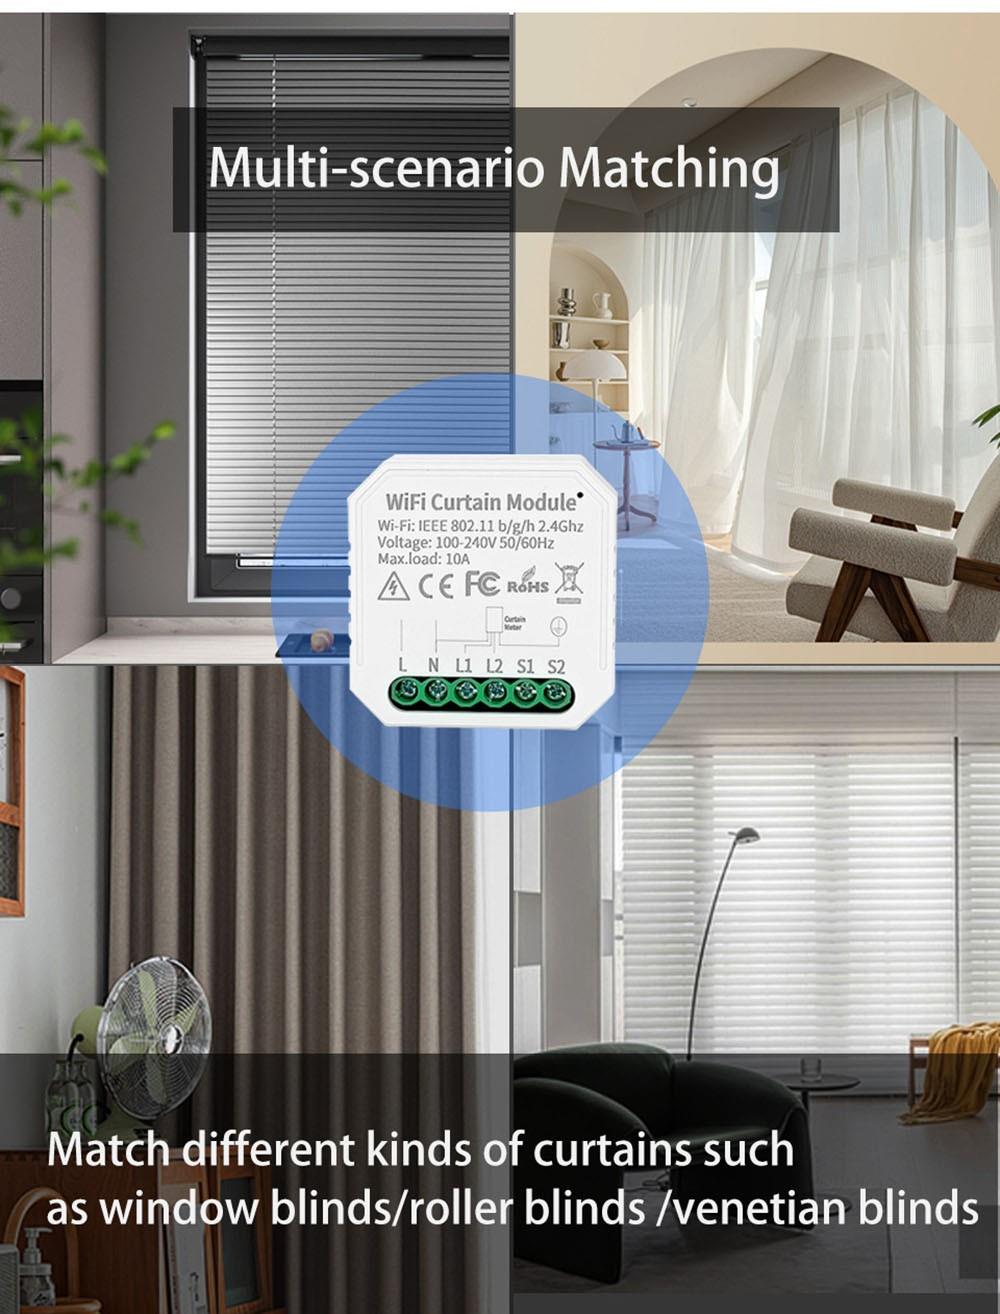 Smart Switch Controller WHD09 For Curtain, Tuya WiFi ,Countdown/Timing Function, App/Voice Control